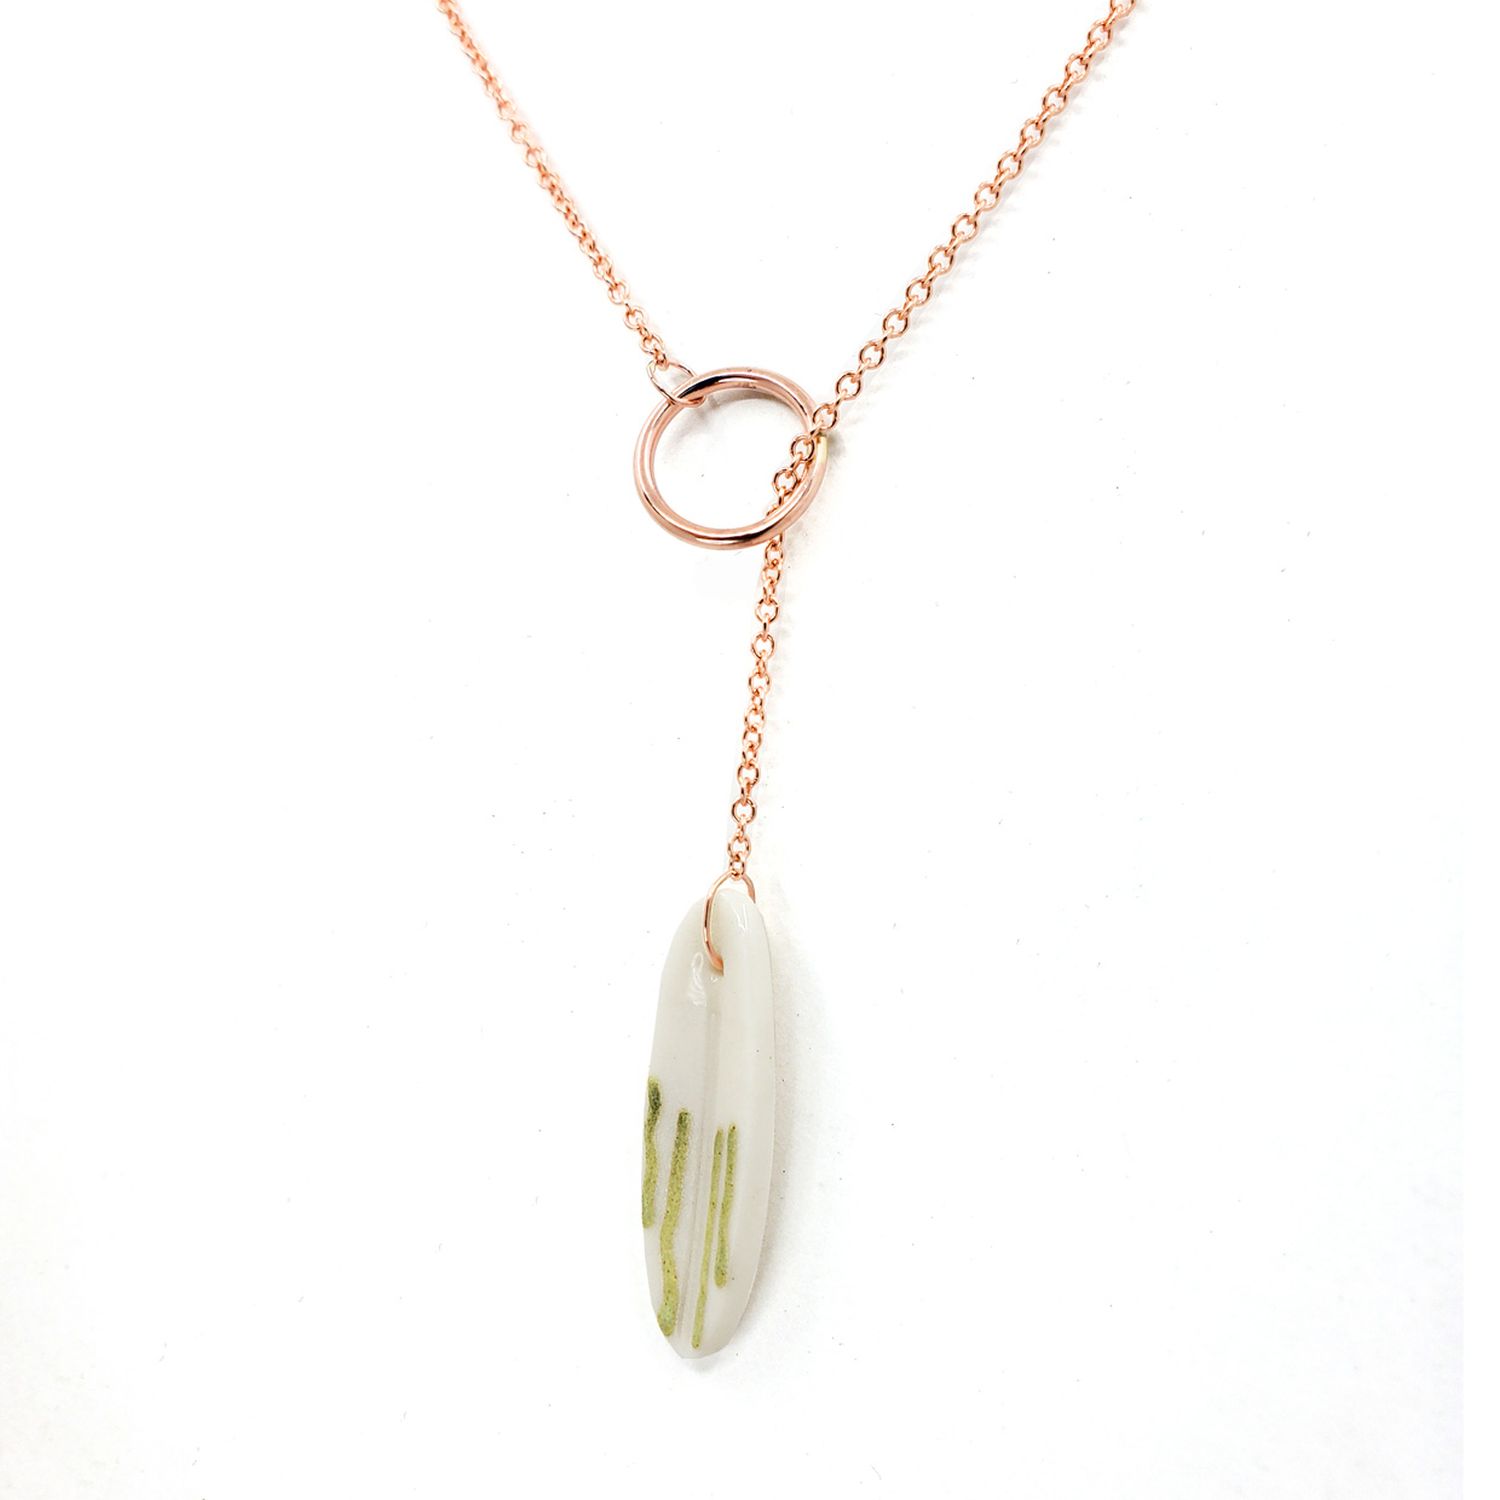 Chayle Jewellery: Willow Lariat Necklace – Porcelain & Rose Gold Filled Product Image 1 of 2